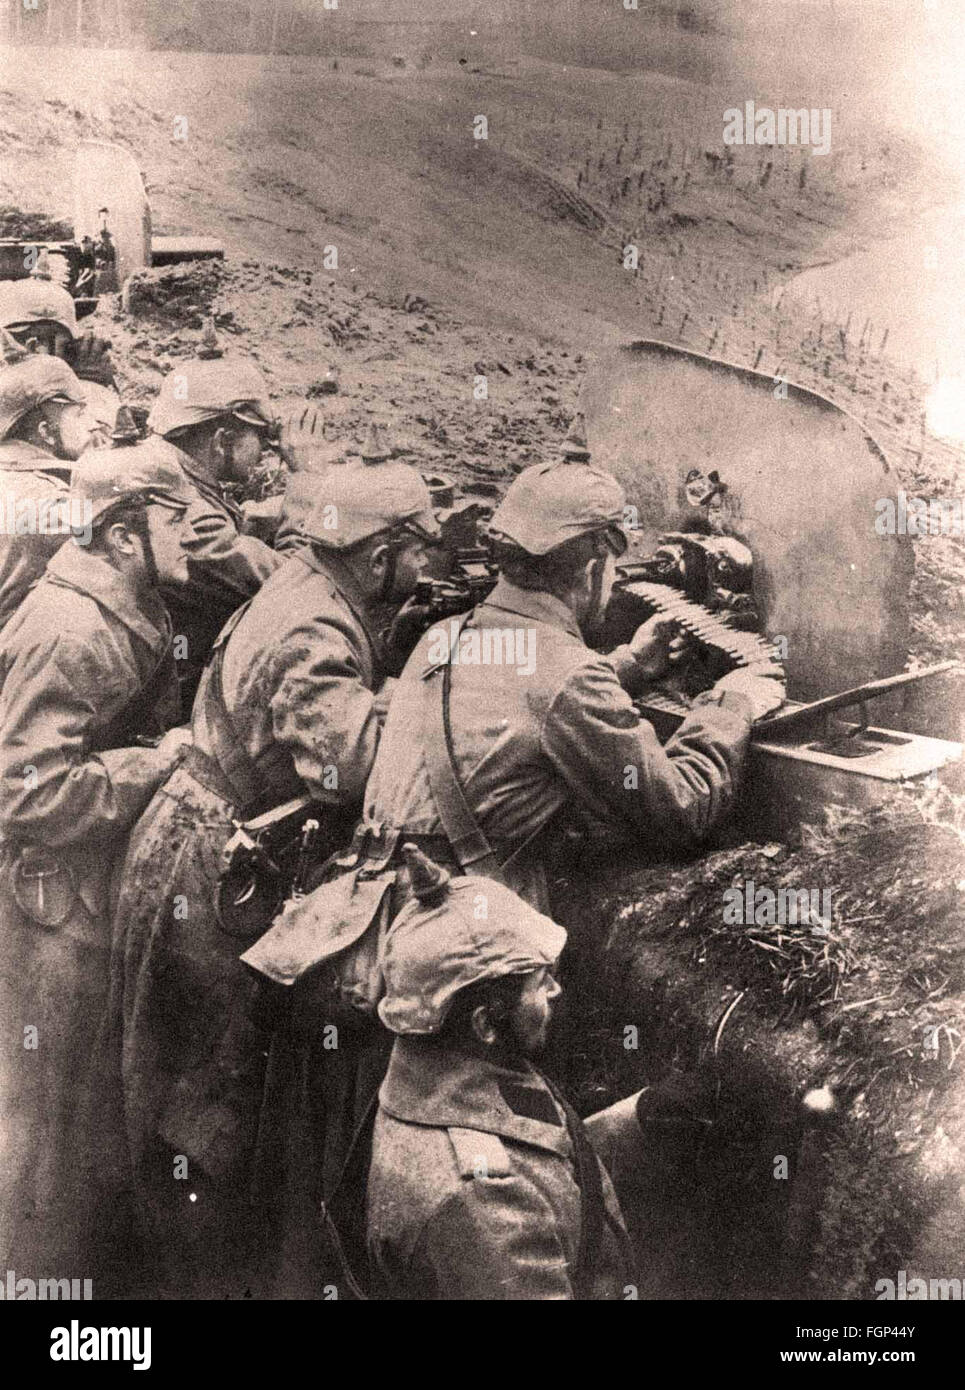 Battle of Verdun 1916 - German soldiers in a trench with a machine gun Stock Photo